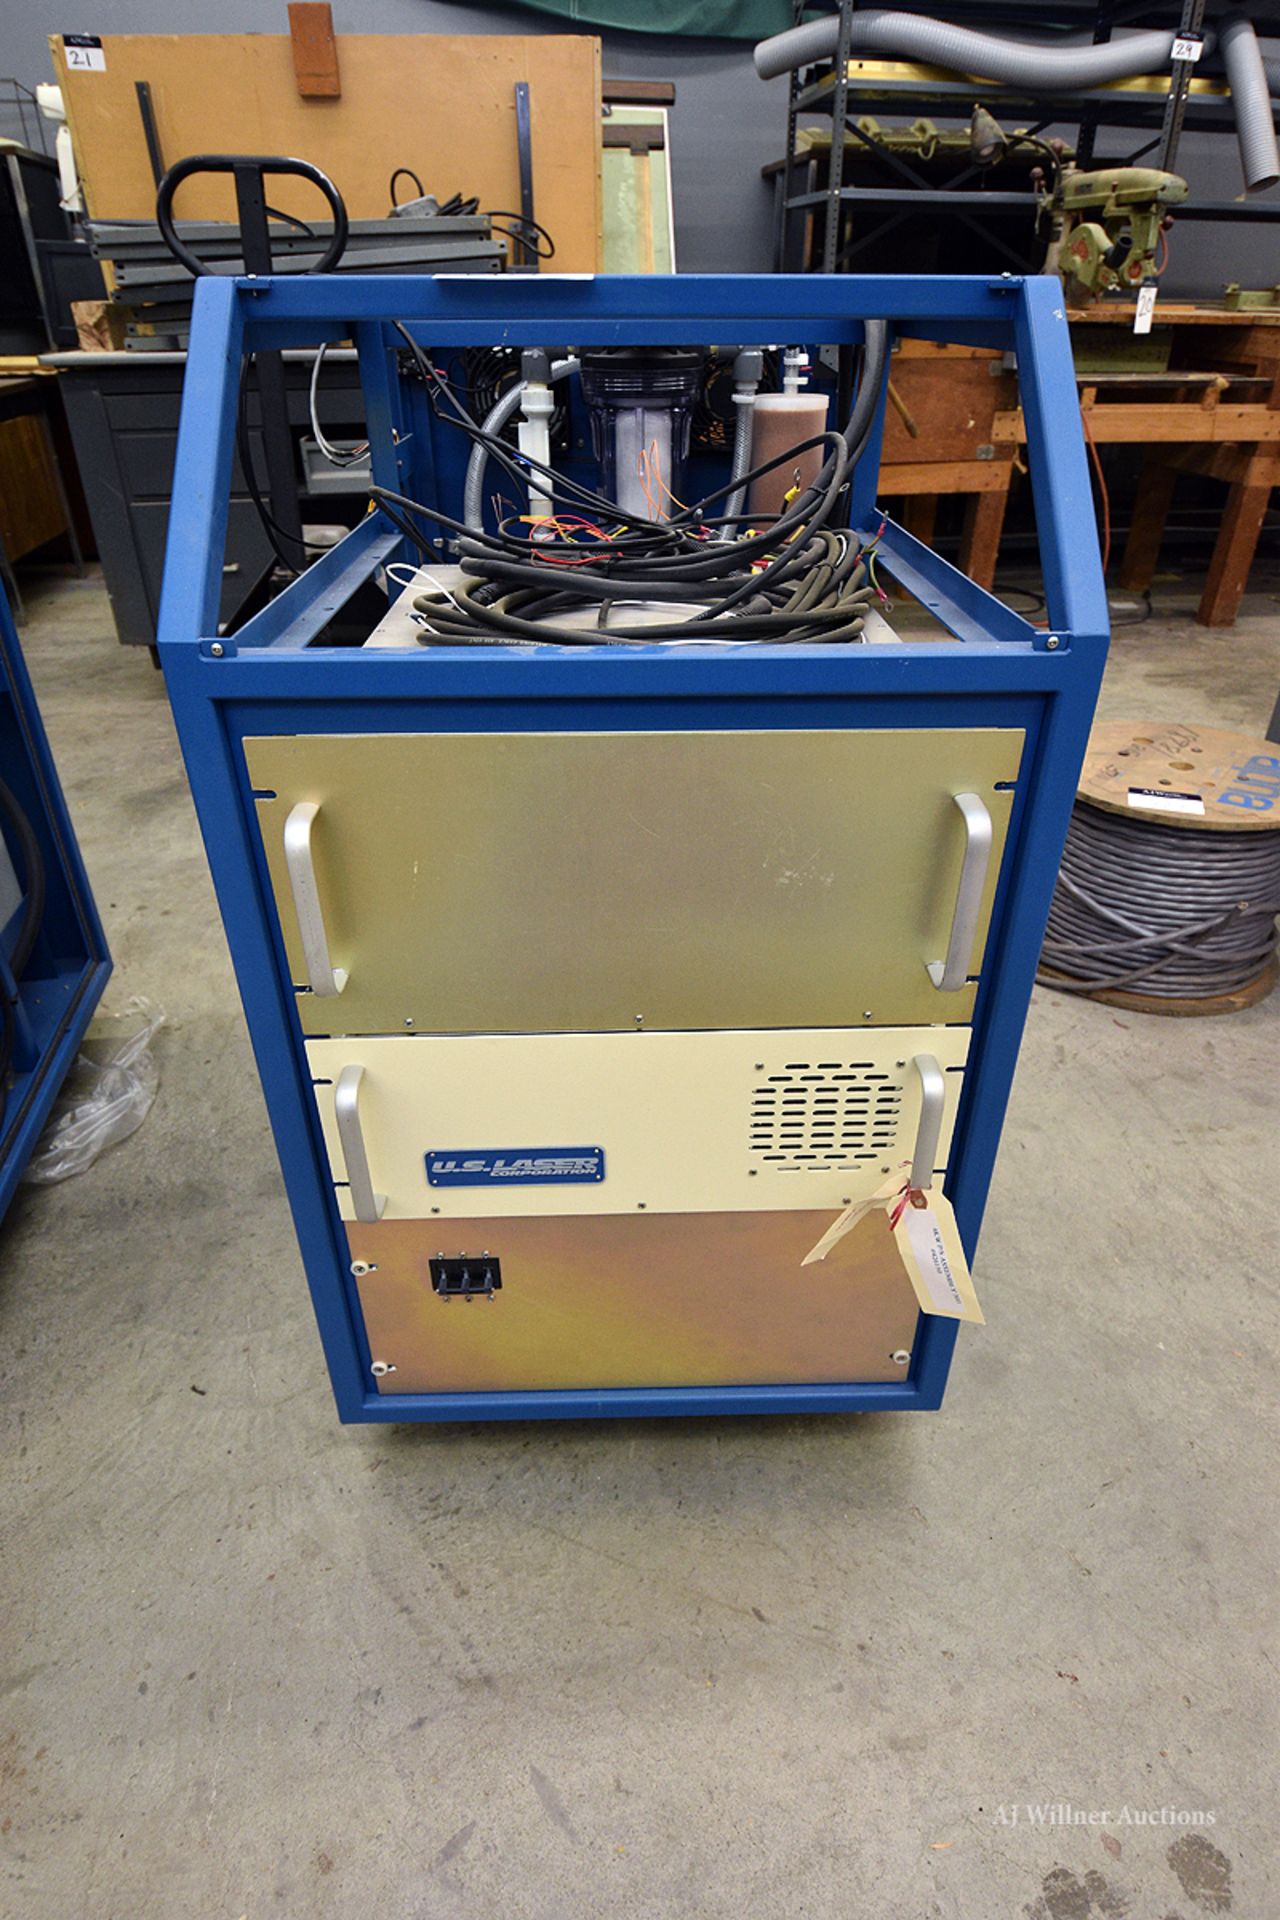 USL model 303 pulsed laser pwr sply, less controller and covers - Image 2 of 4